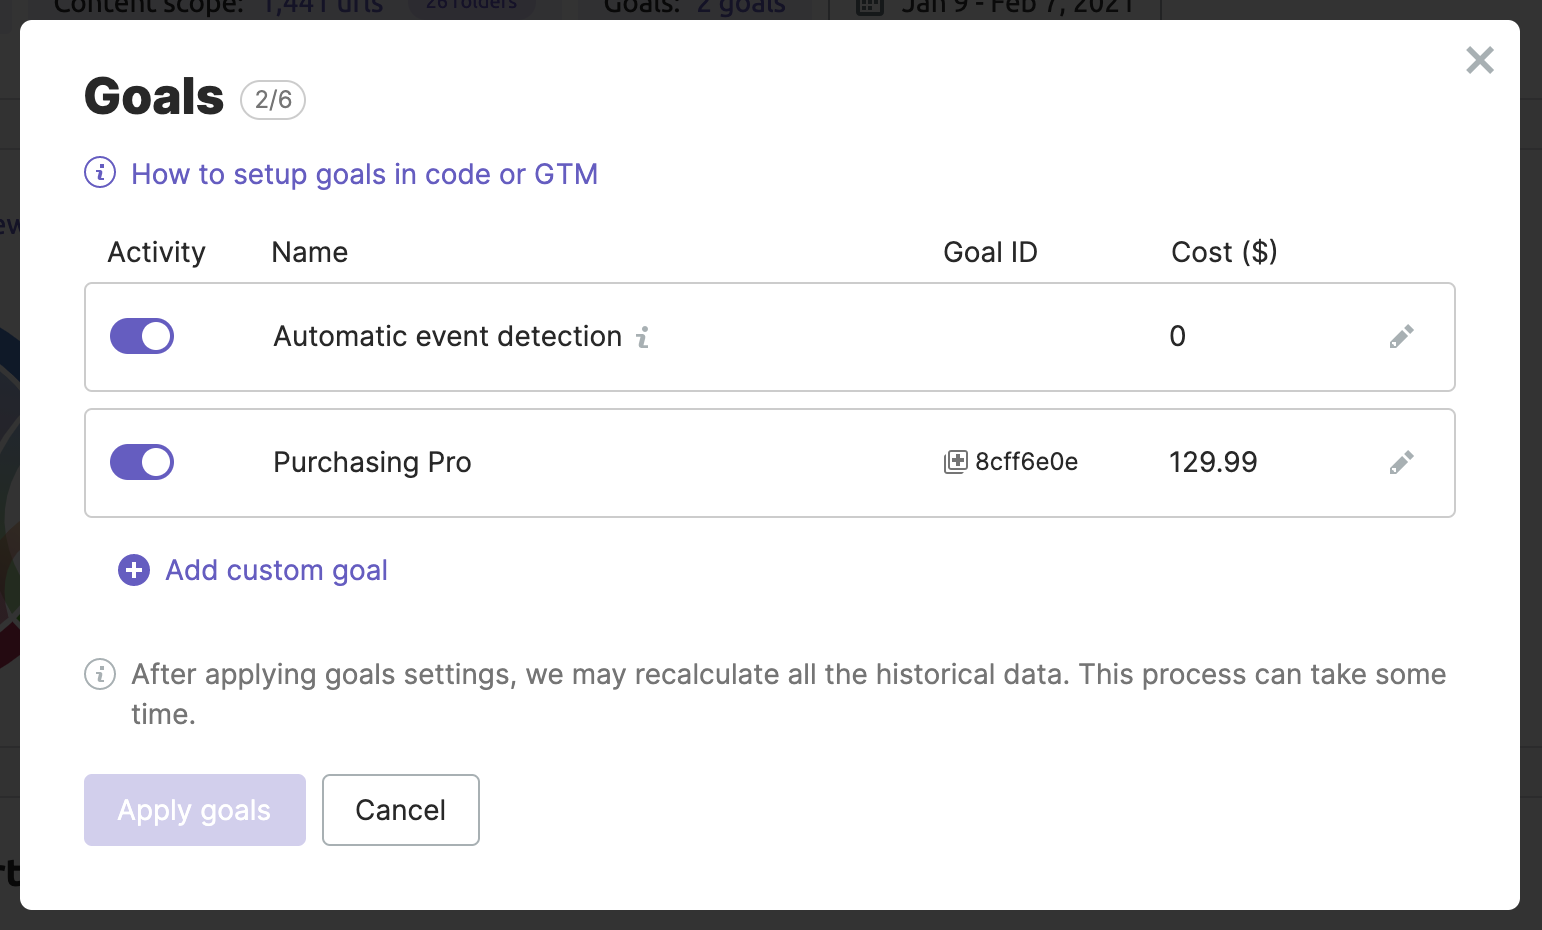 How to add a custom goal in the goals management modal window of ImpactHero.